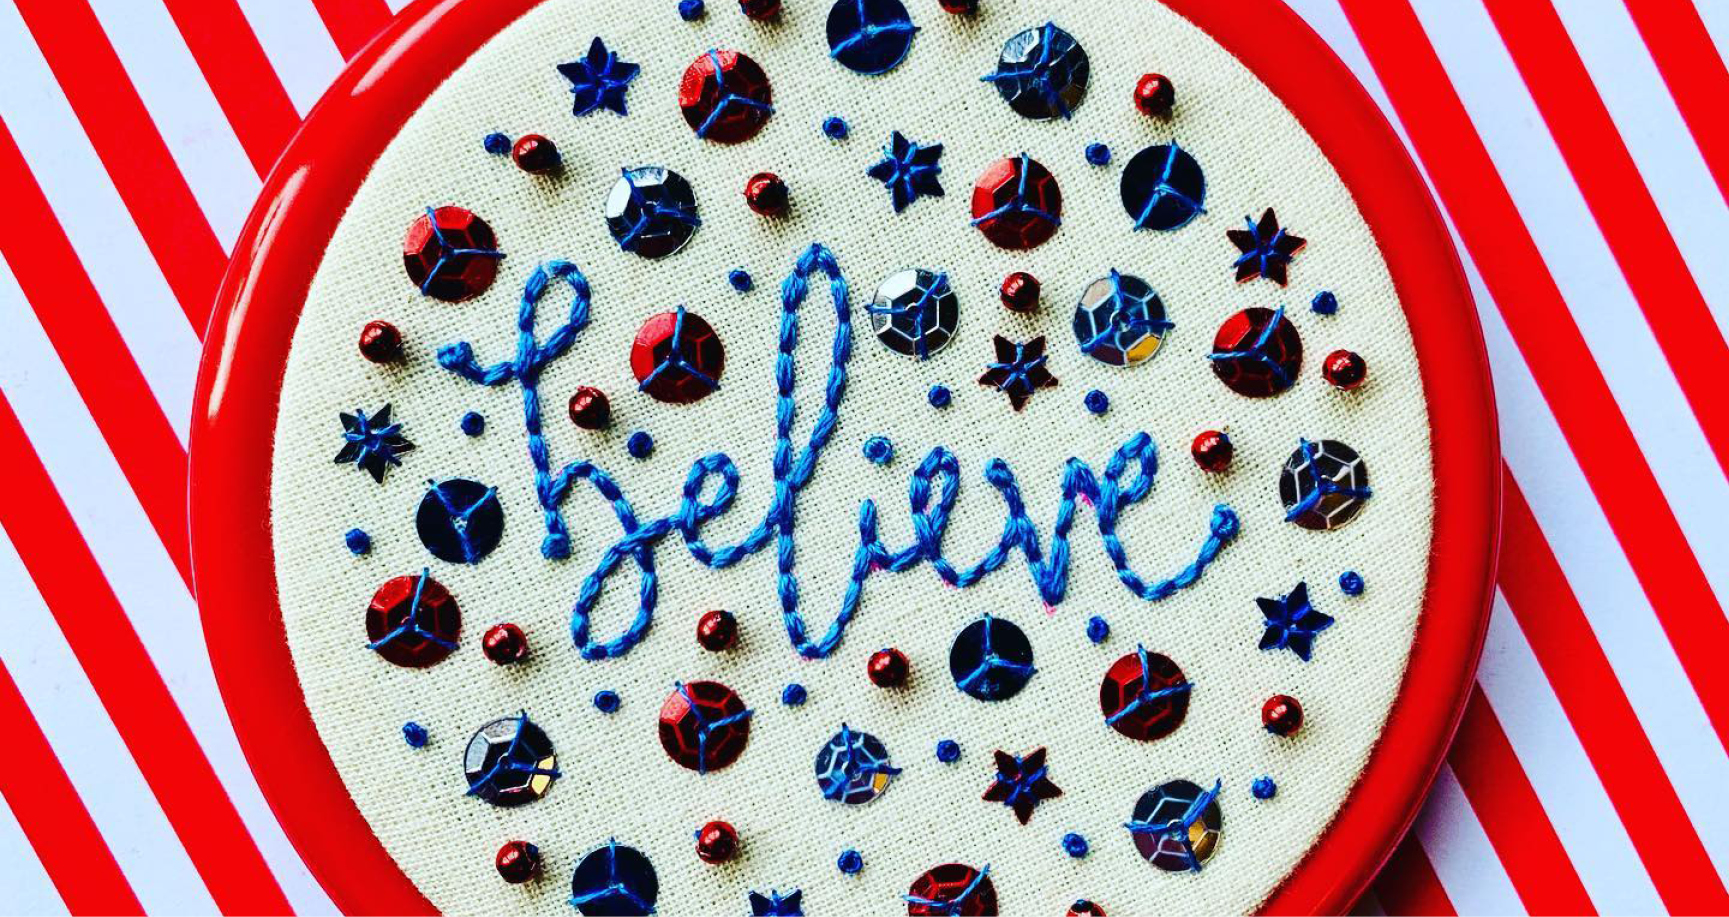 The word Believe hand stitched